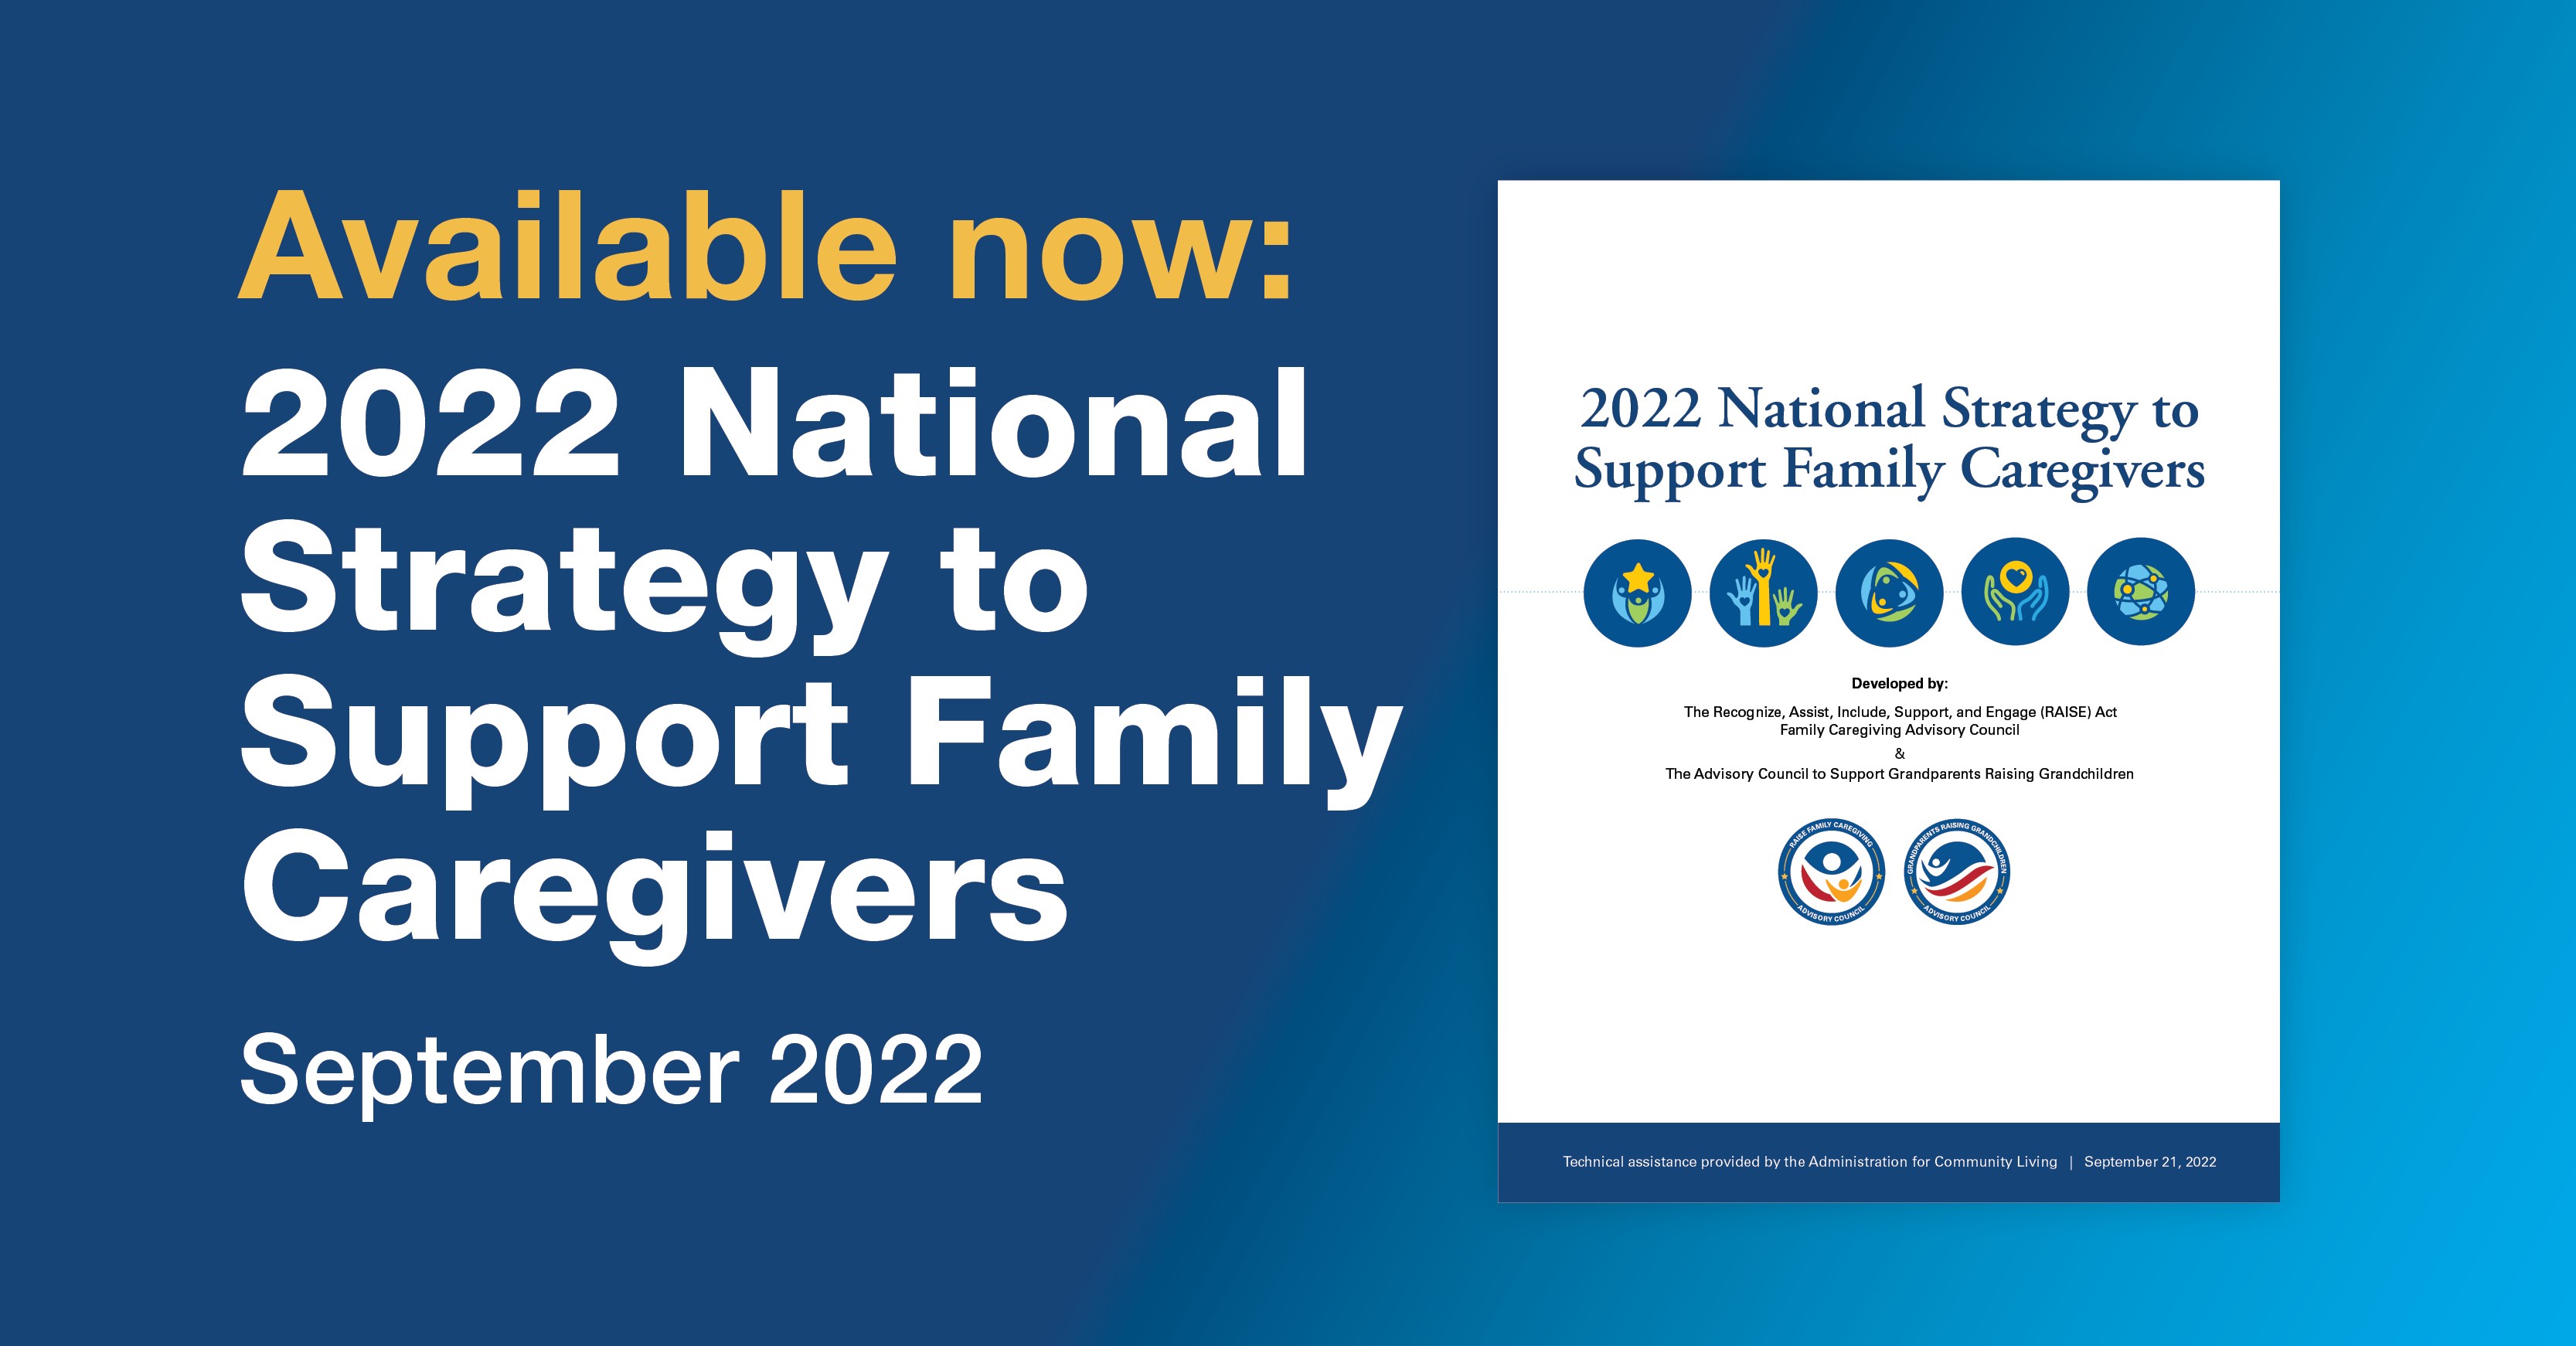 Available now: 2022 National Strategy to Support Family Caregivers. September 2022